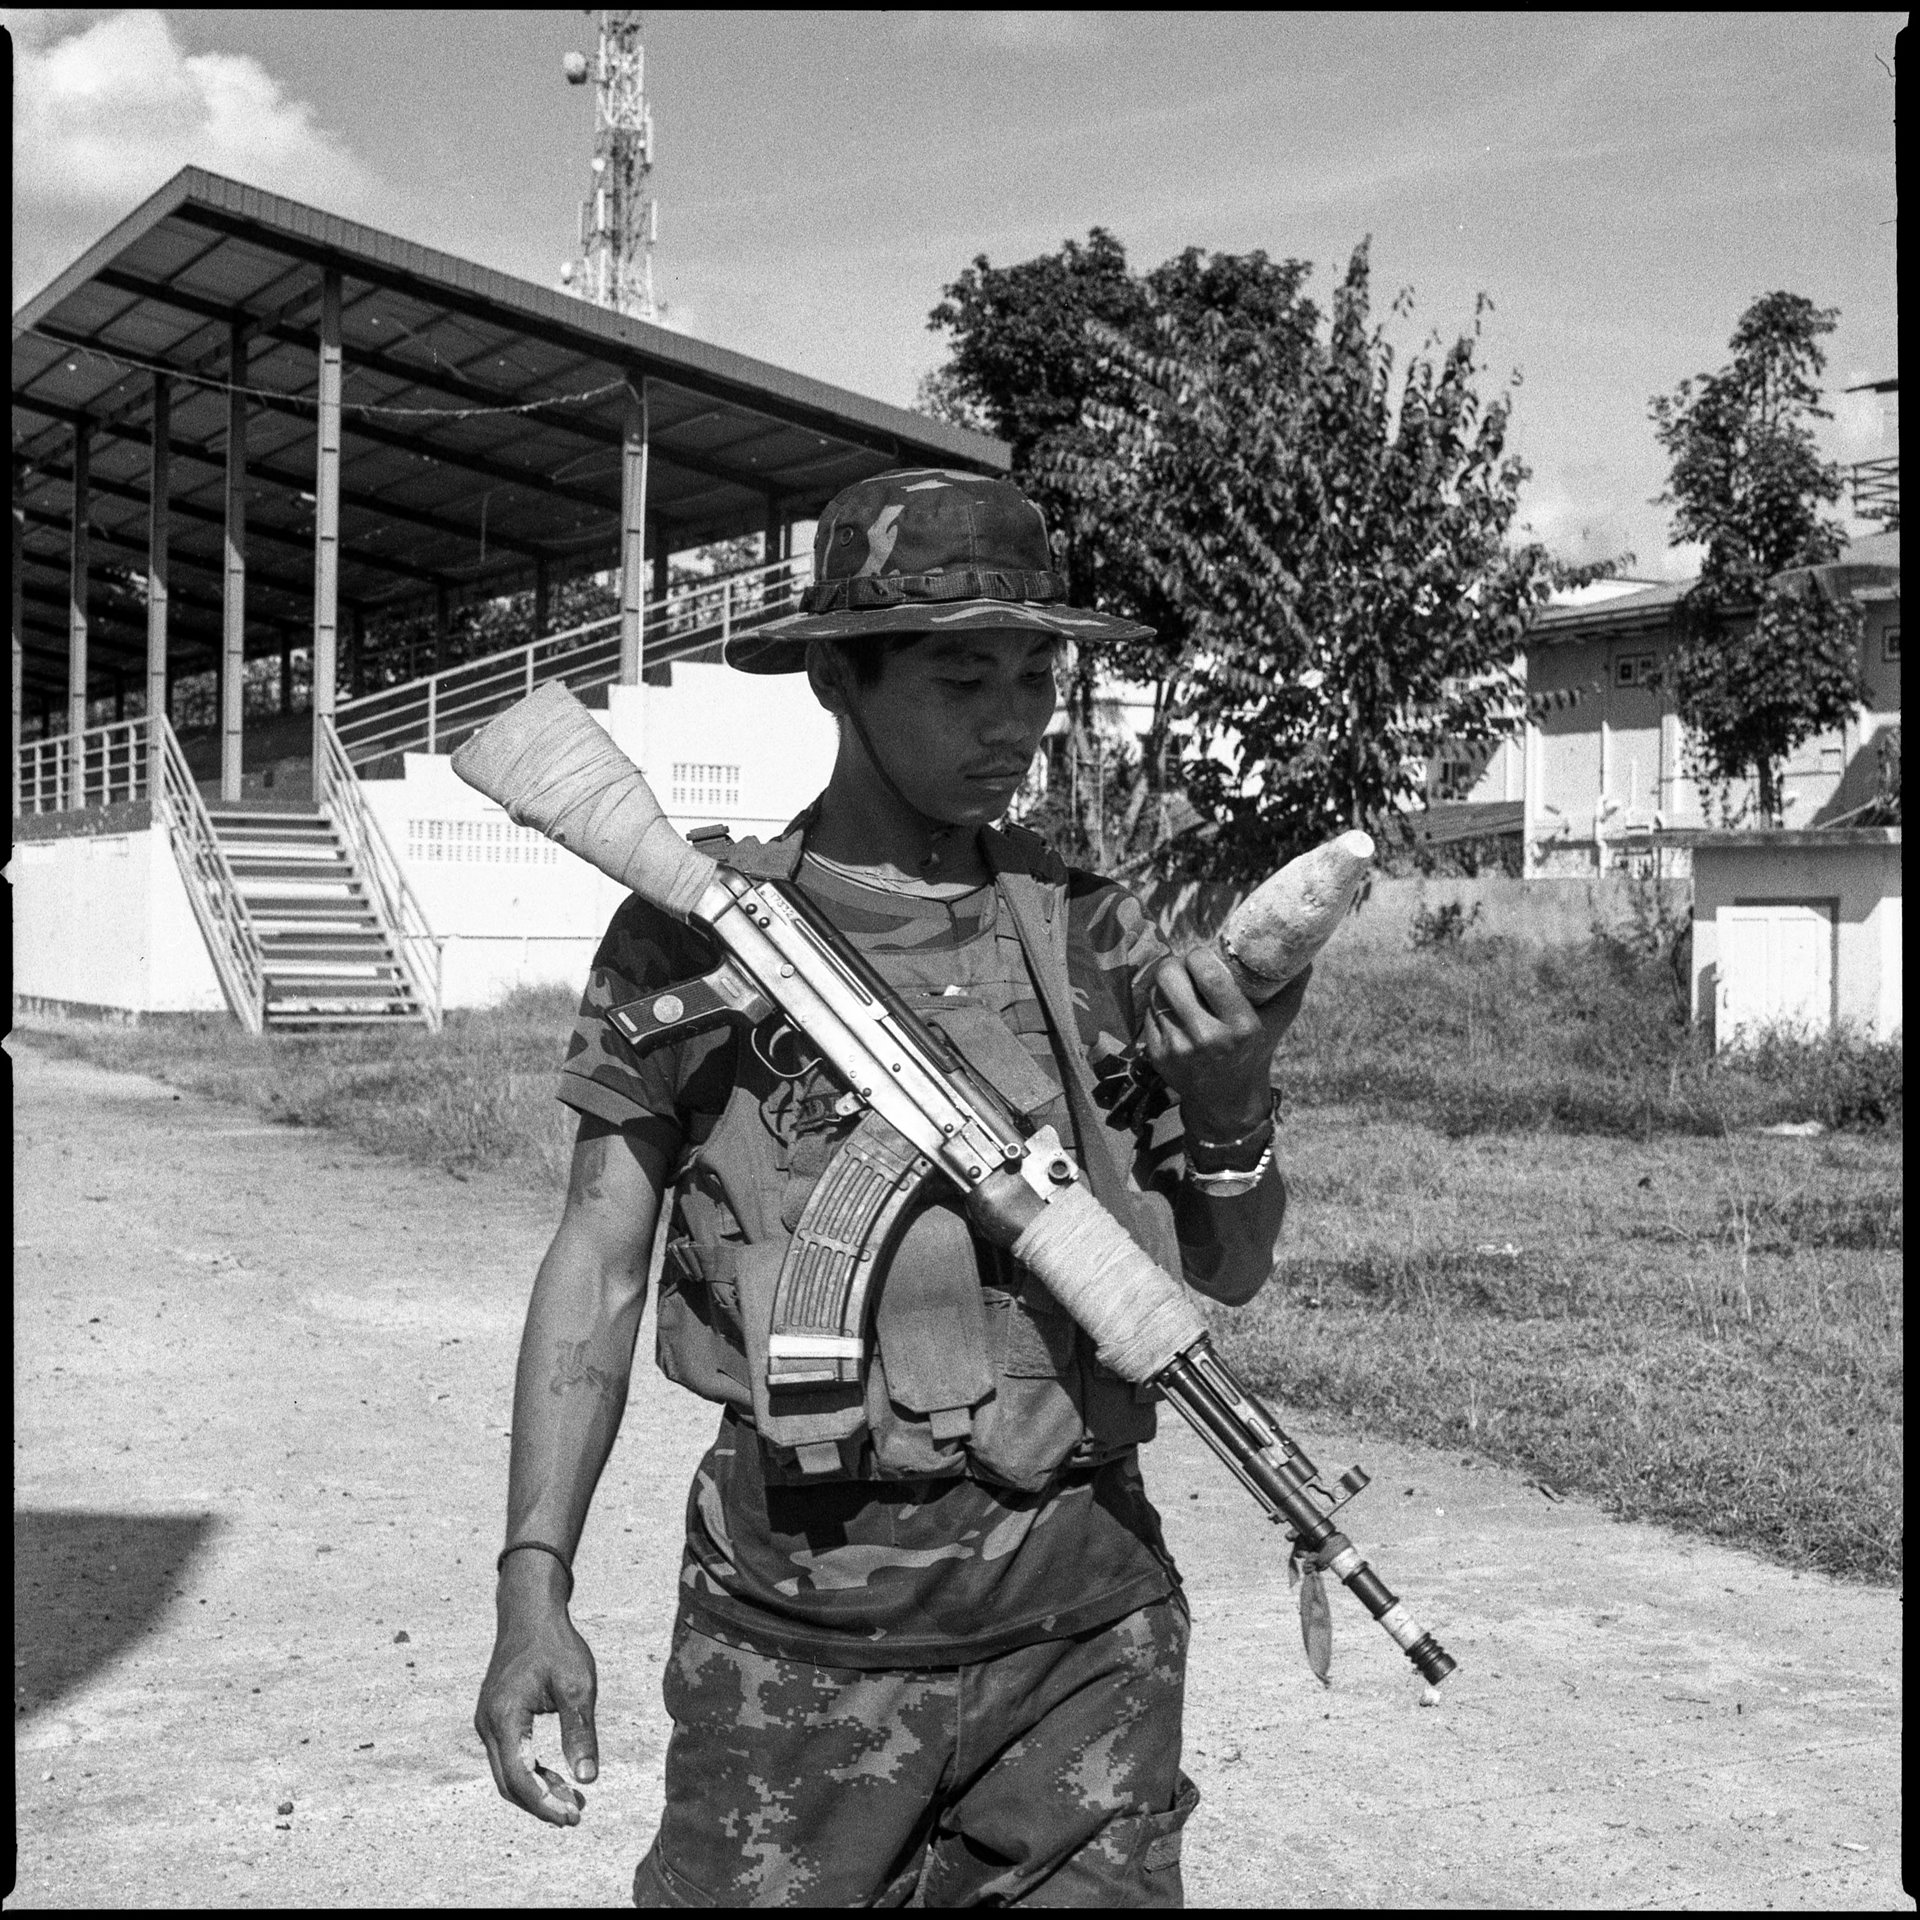 A fighter with the Karenni Nationalities Defense Force (KNDF) examines an unexploded mortar removed from the ground at Loikaw stadium in Kayah (Karenni) State, Myanmar. Fighters reportedly extract gunpowder from unexploded ordnance for reuse in weapons against the Myanmar military.